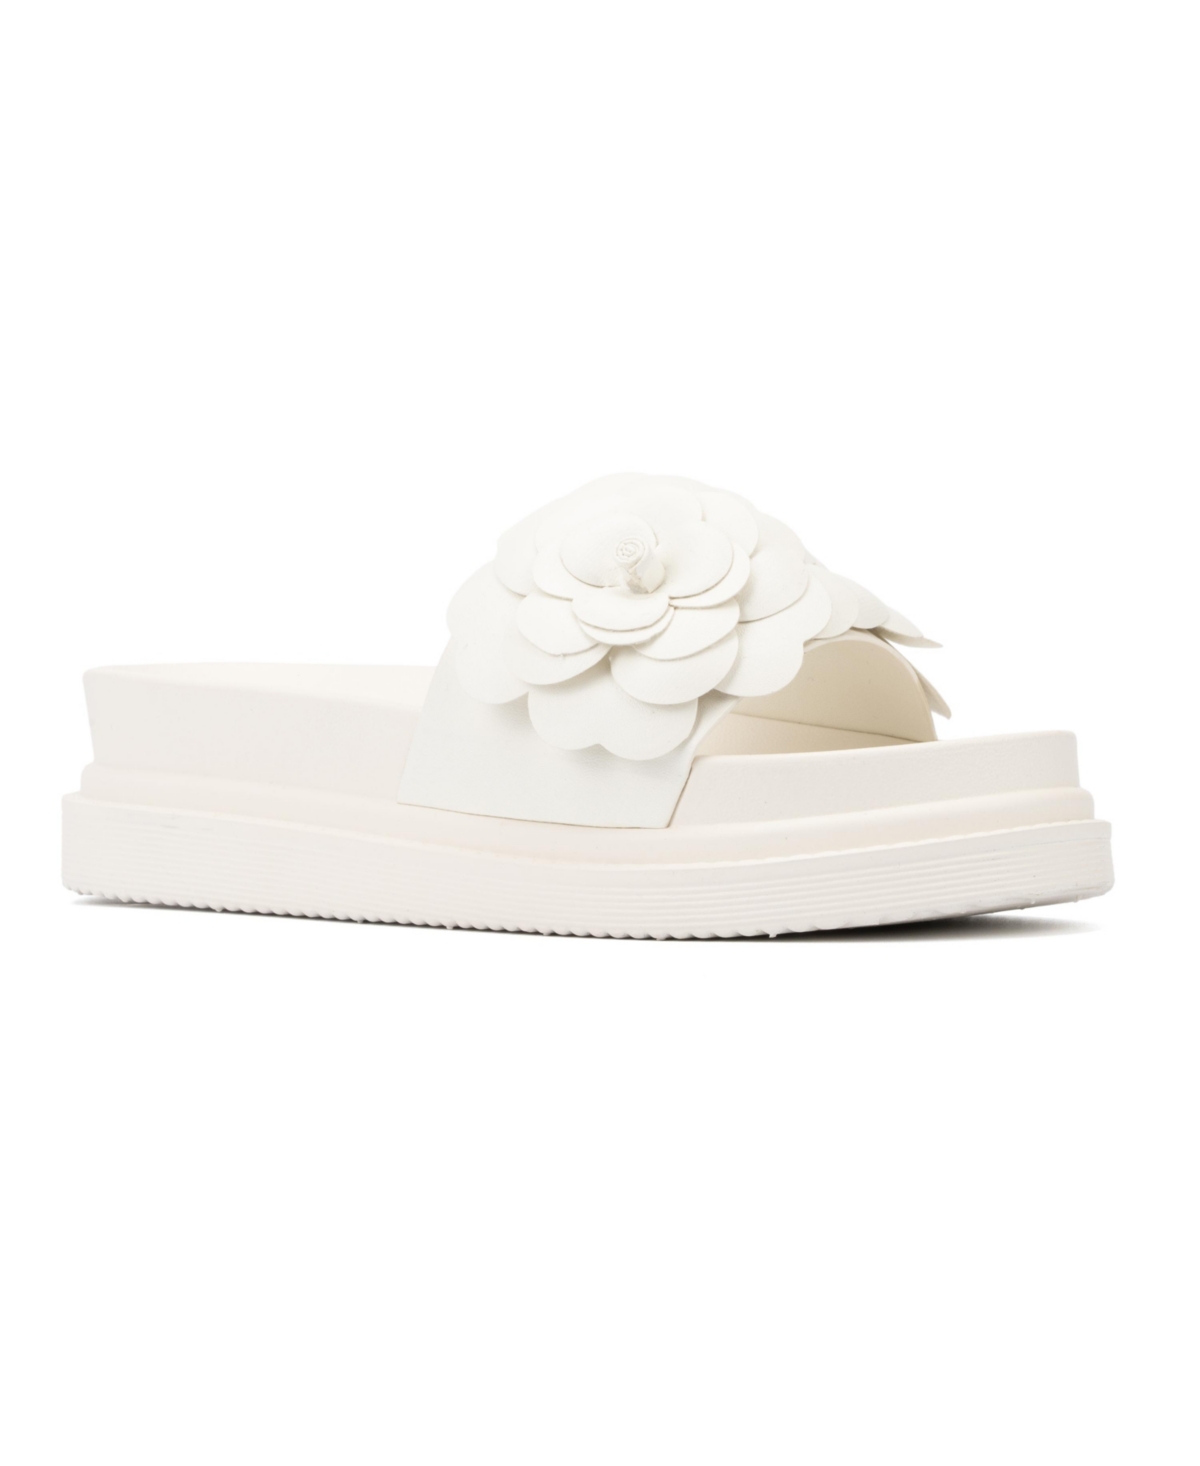 New York And Company New York & Company Women's Camilia Flower Slides In White